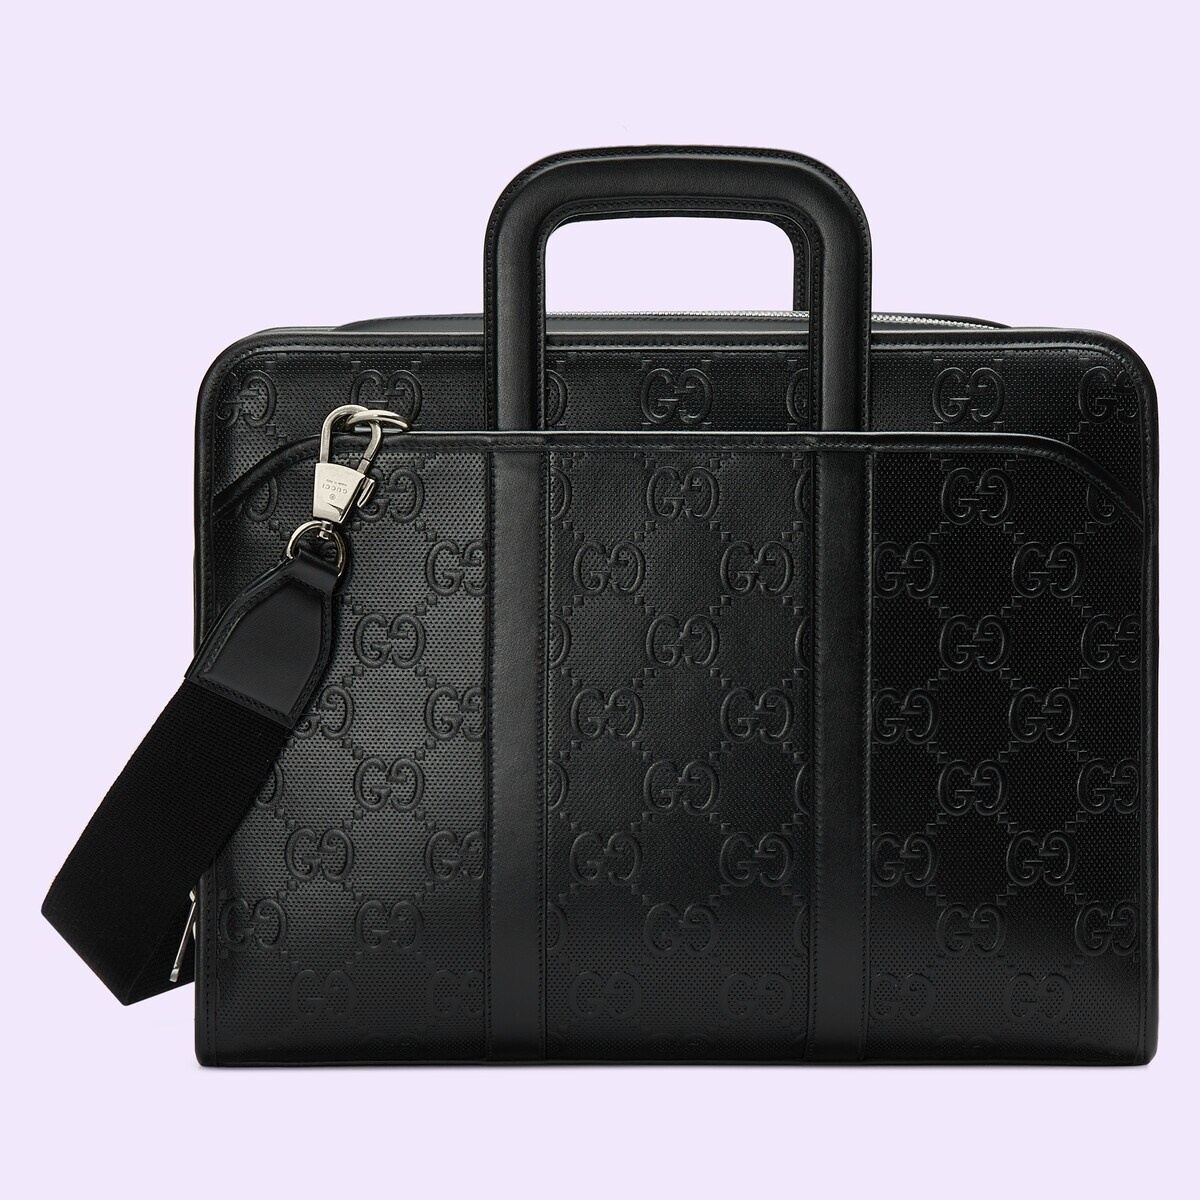 GG embossed briefcase - 1